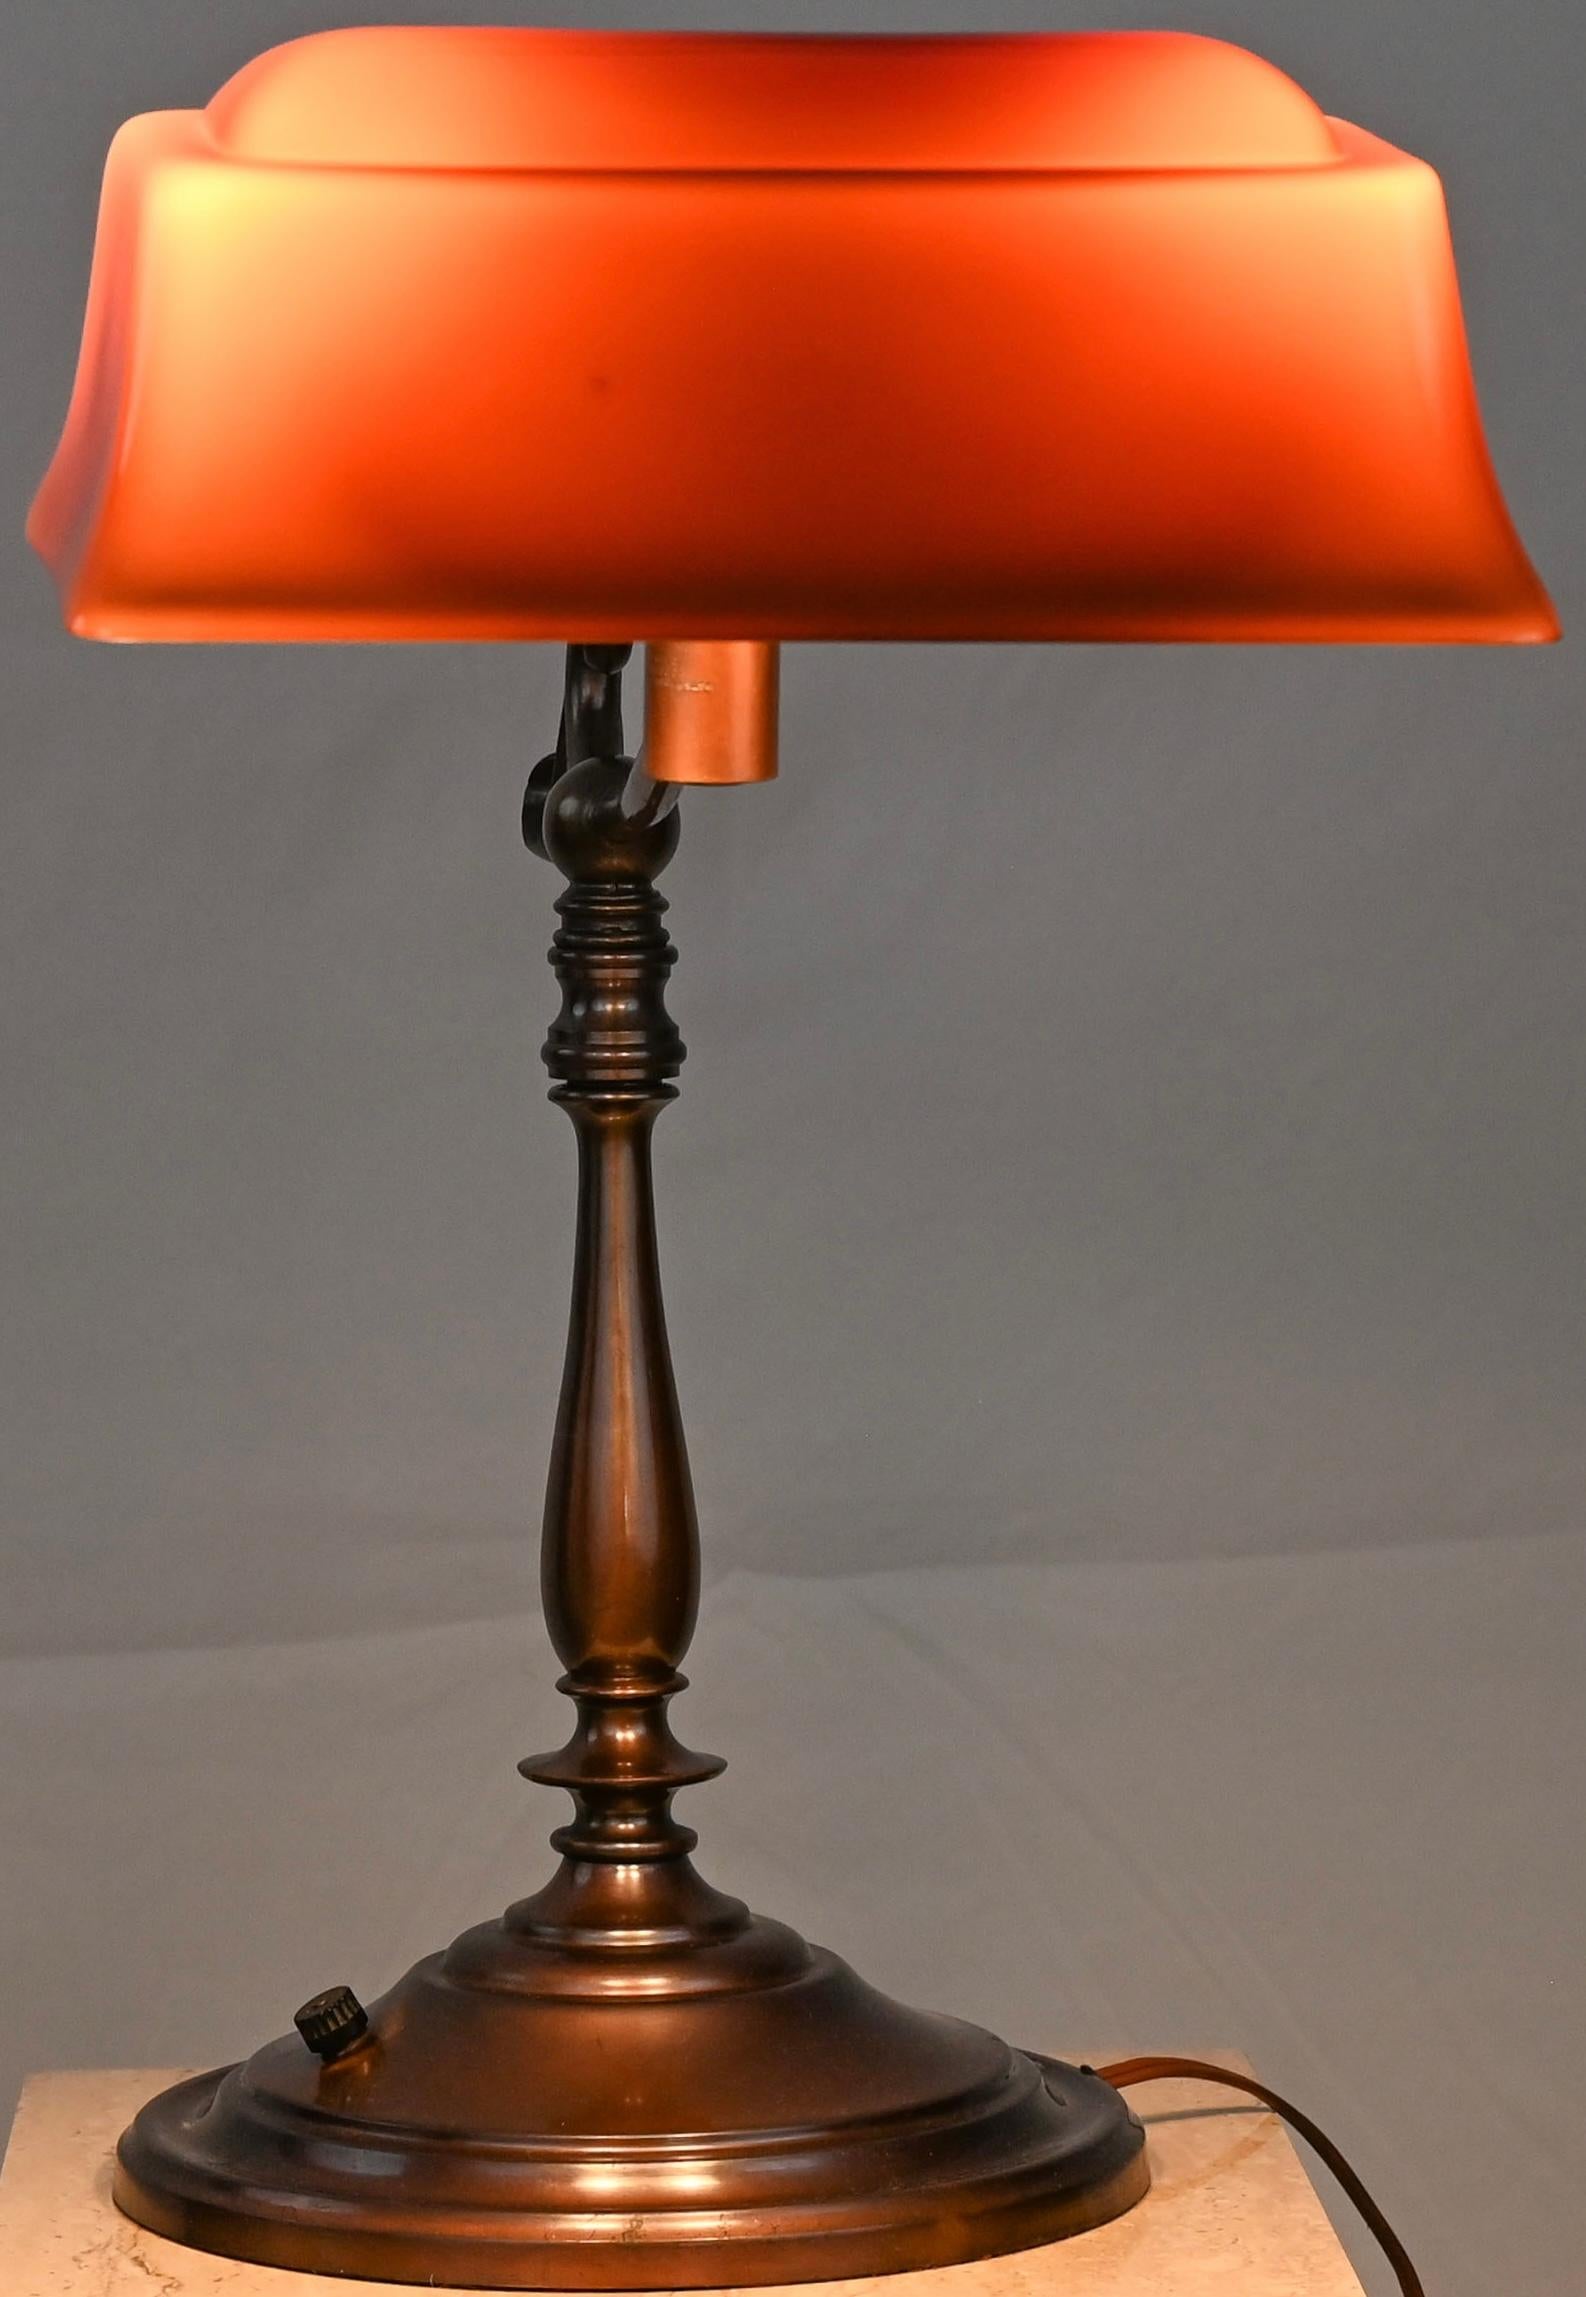 A stunning American Art Nouveau Emeralie table lamp or desk lamp with its original shade. This superb banker's lamp / Emeralite with red / orange opaline glass shade and brass base was made around 1900. It is in very good condition, working order as